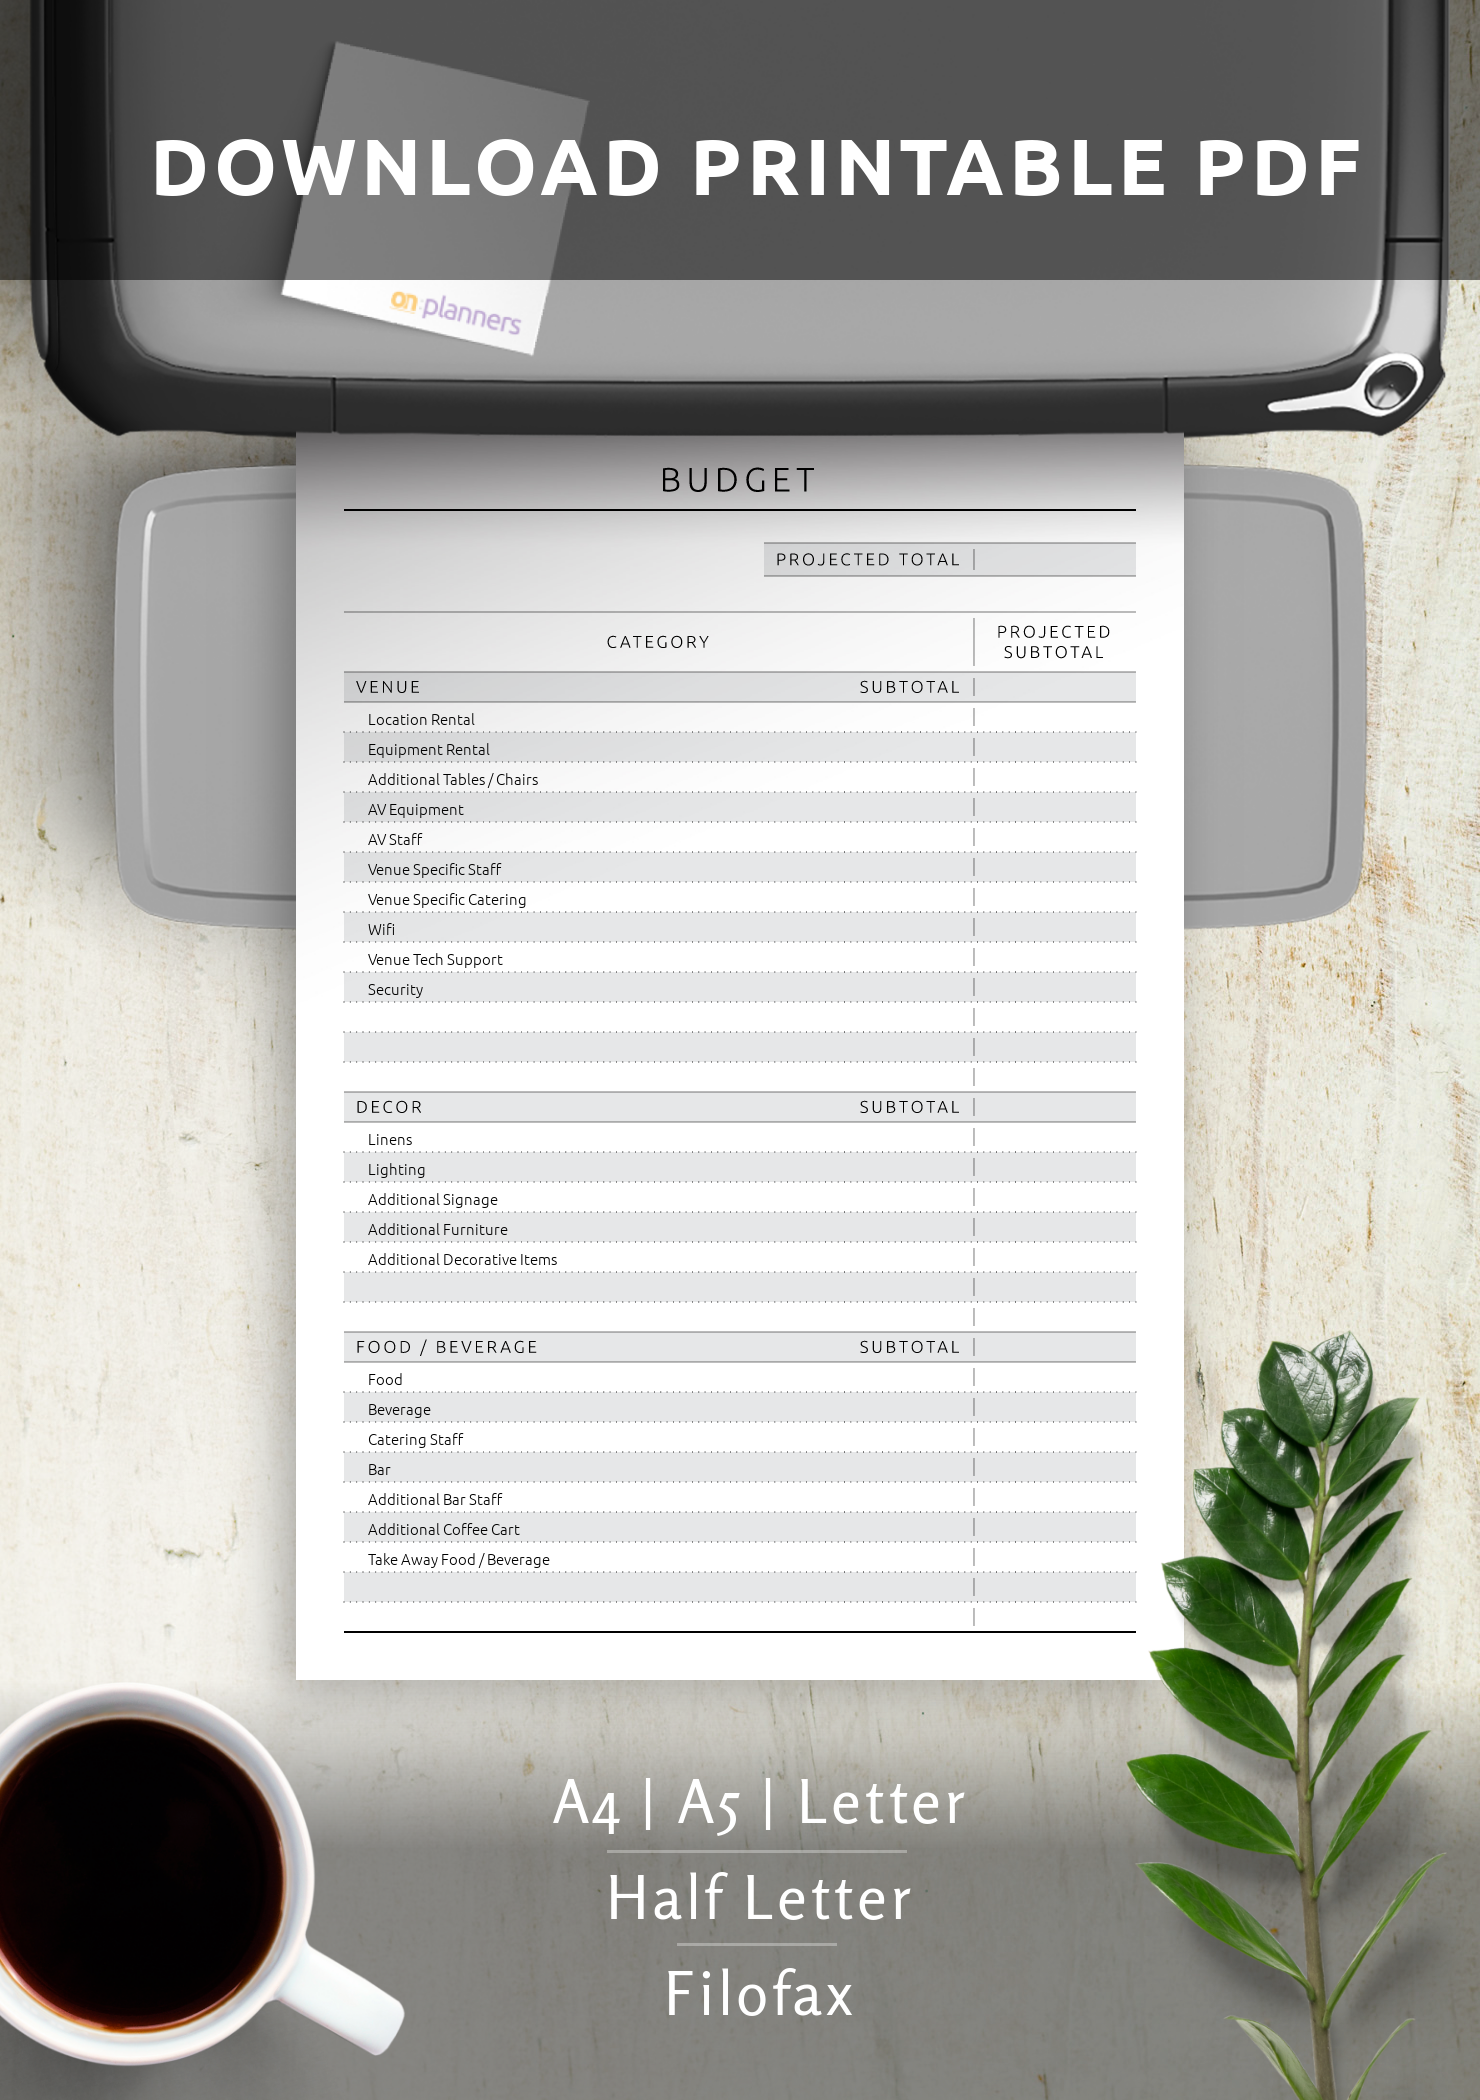 Download Printable Party Budget Template - Original Style PDF